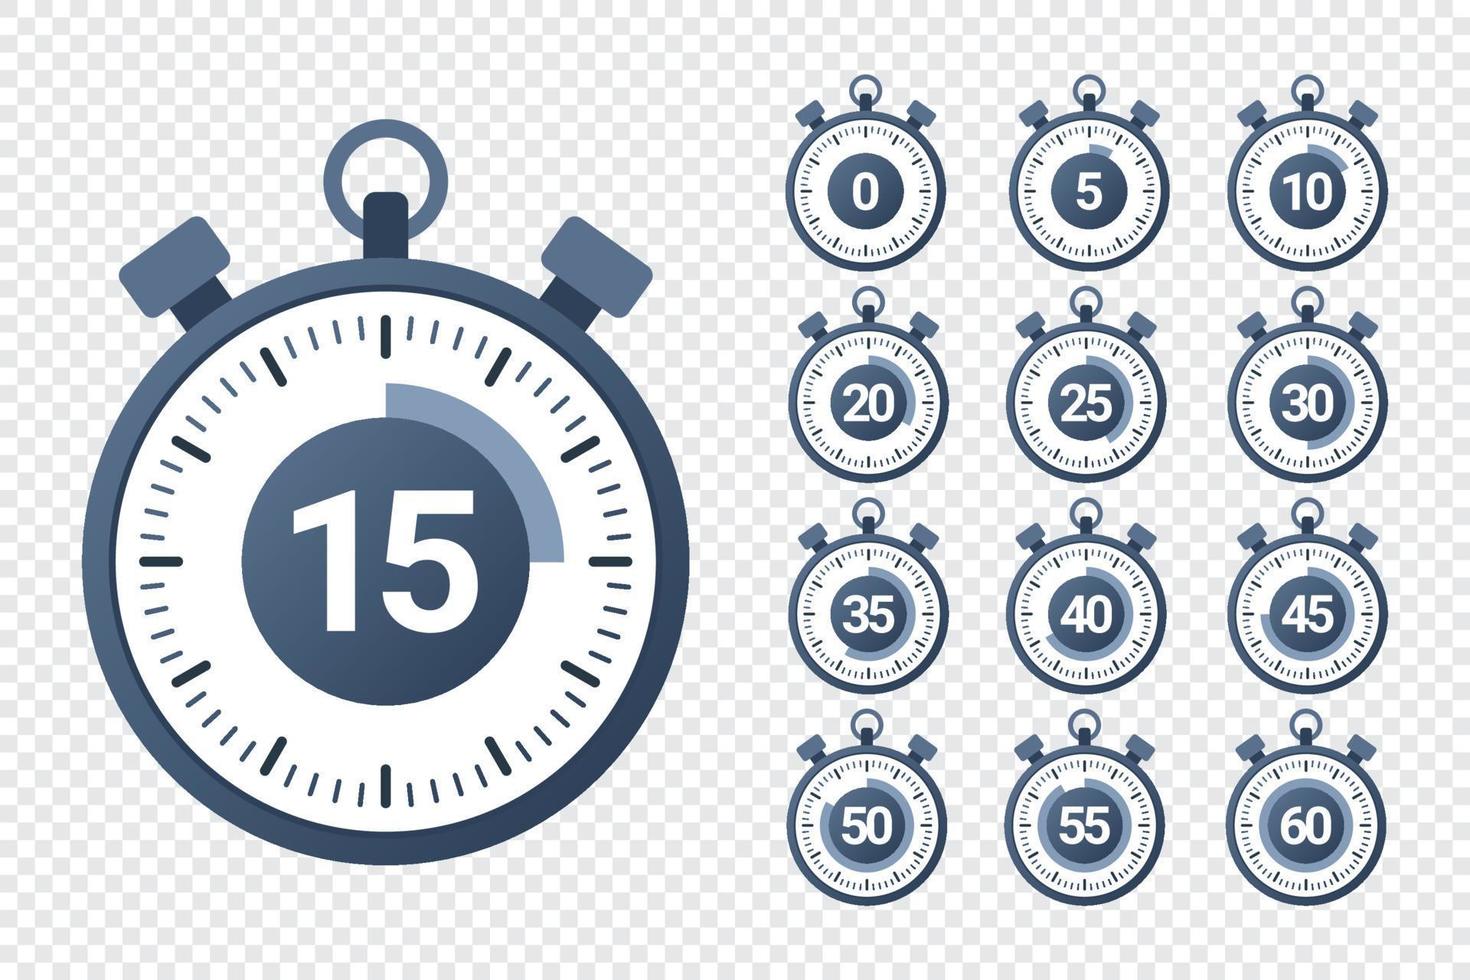 Stopwatch icons. Timer icons set. Countdown from 0 to 60 seconds. Stopwatch symbol collection. Vector illustration